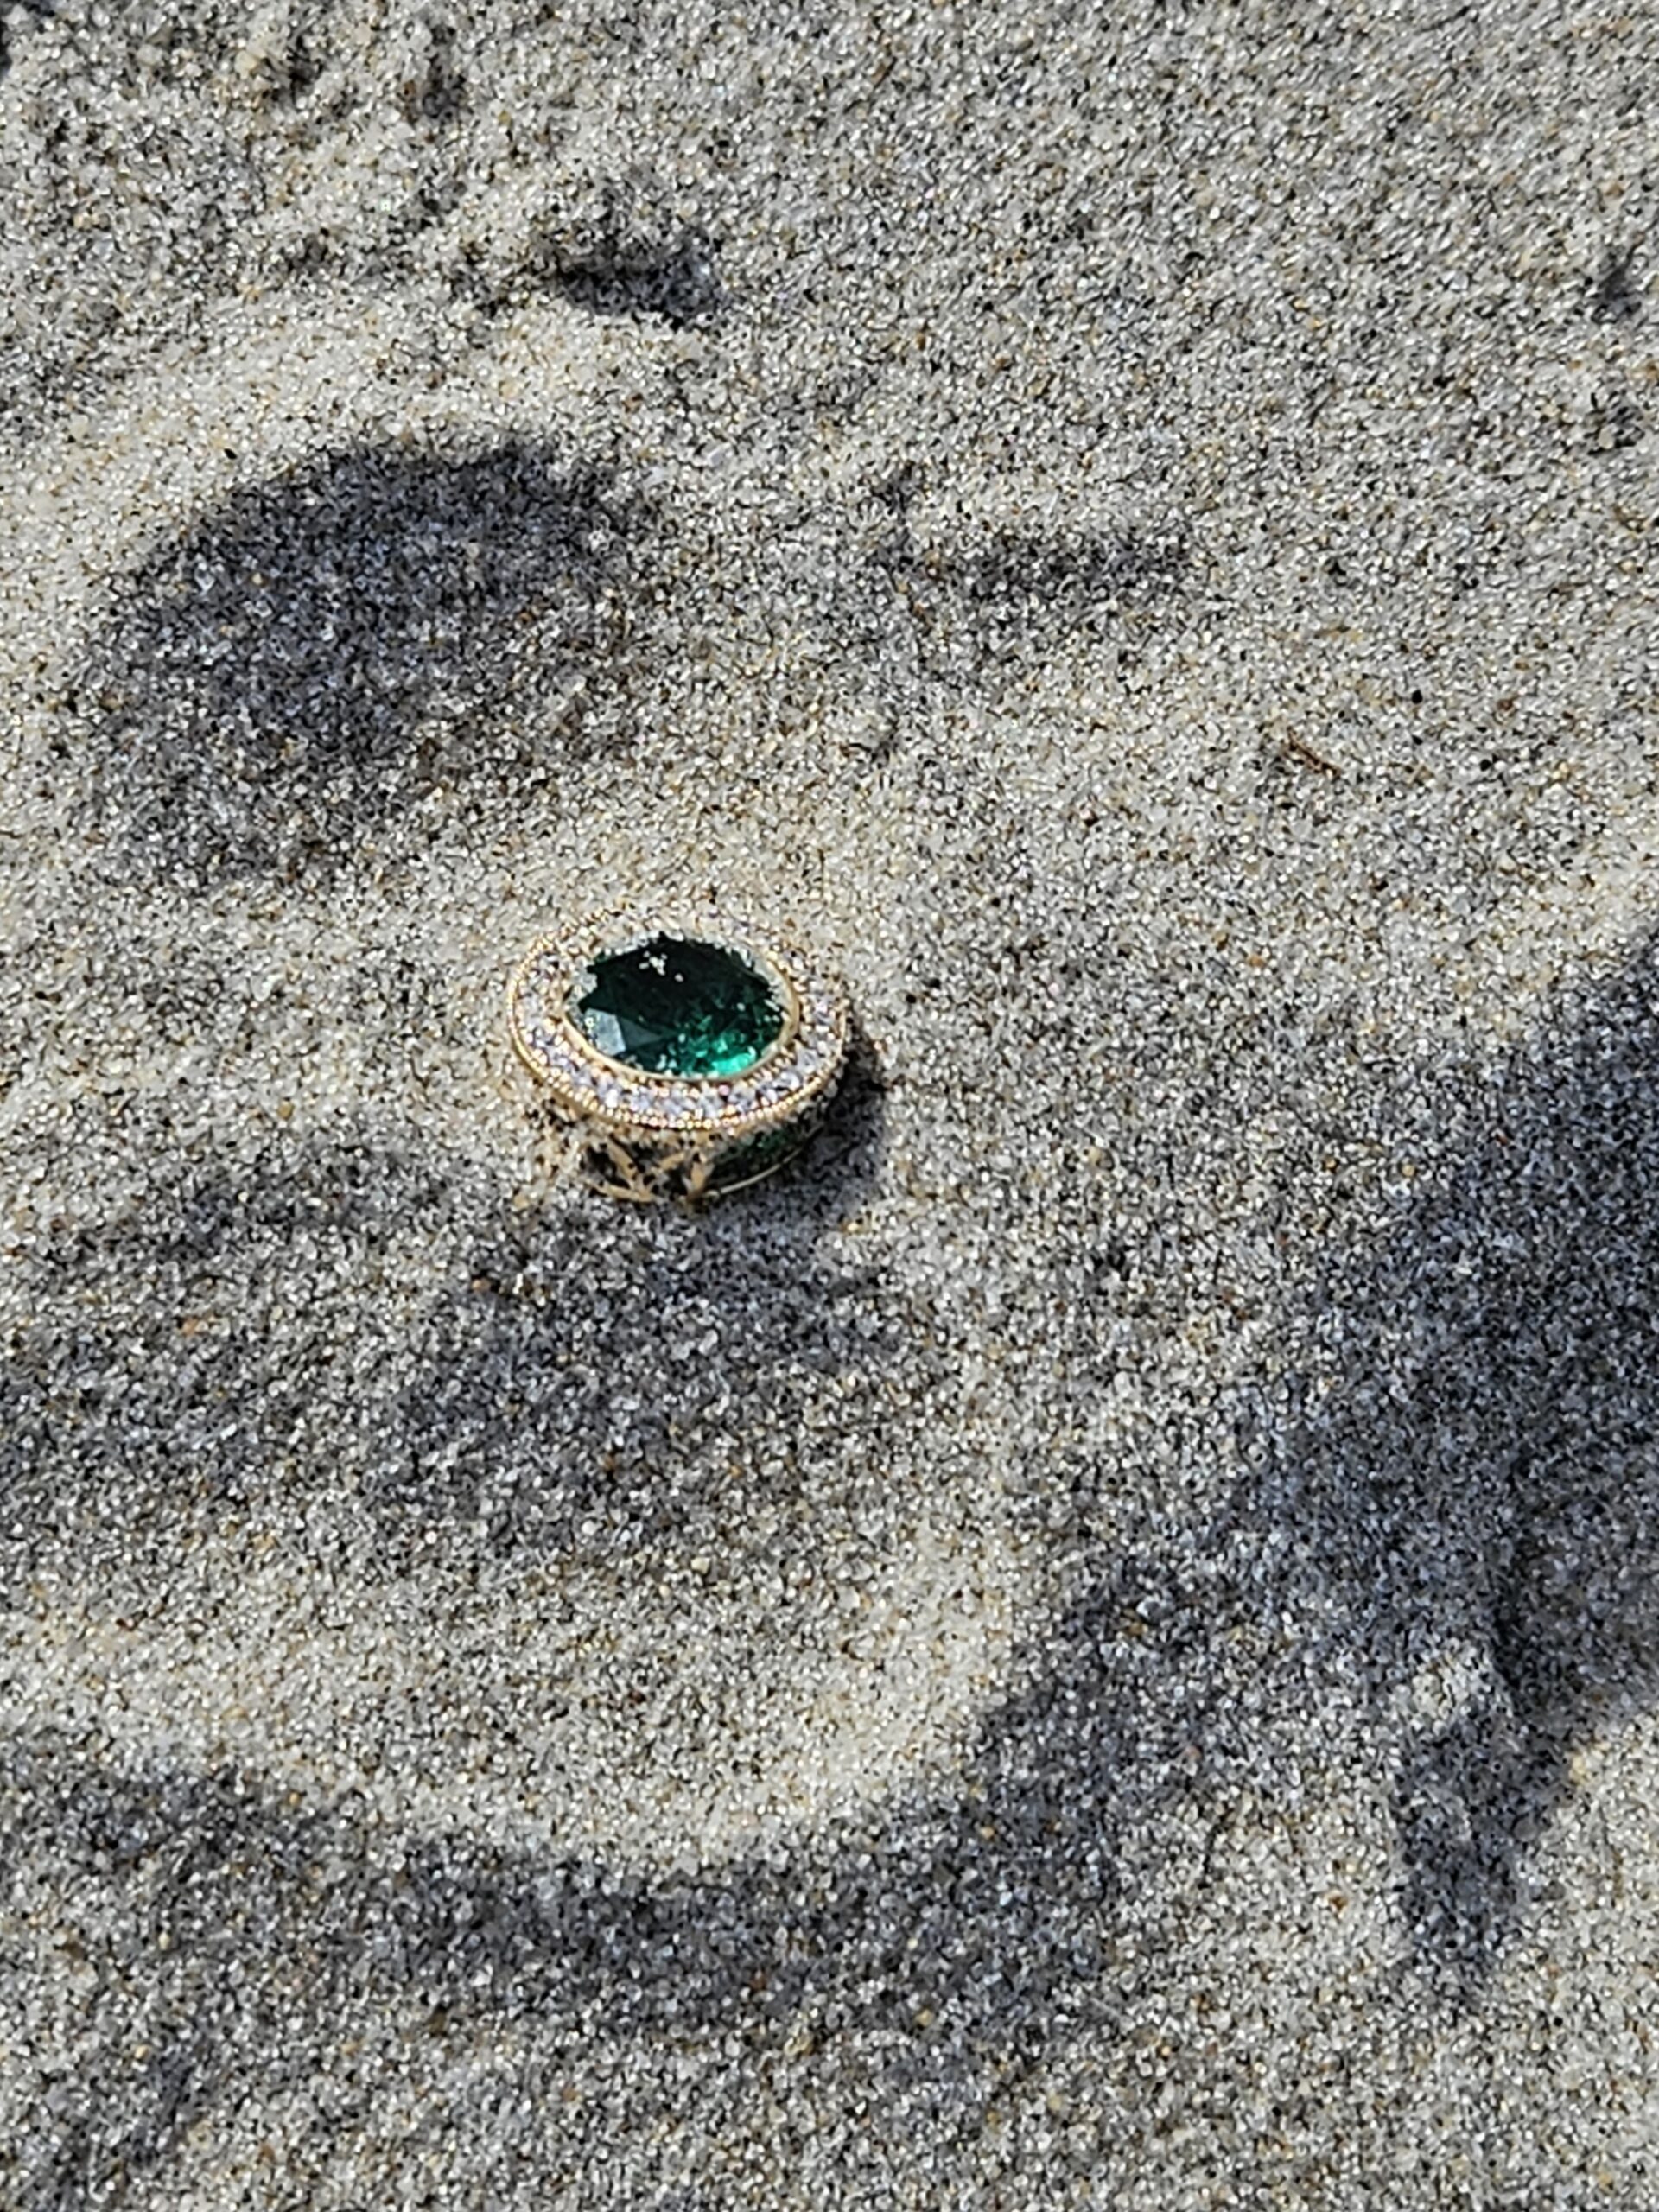 Find ring in the sand Avalon Nj